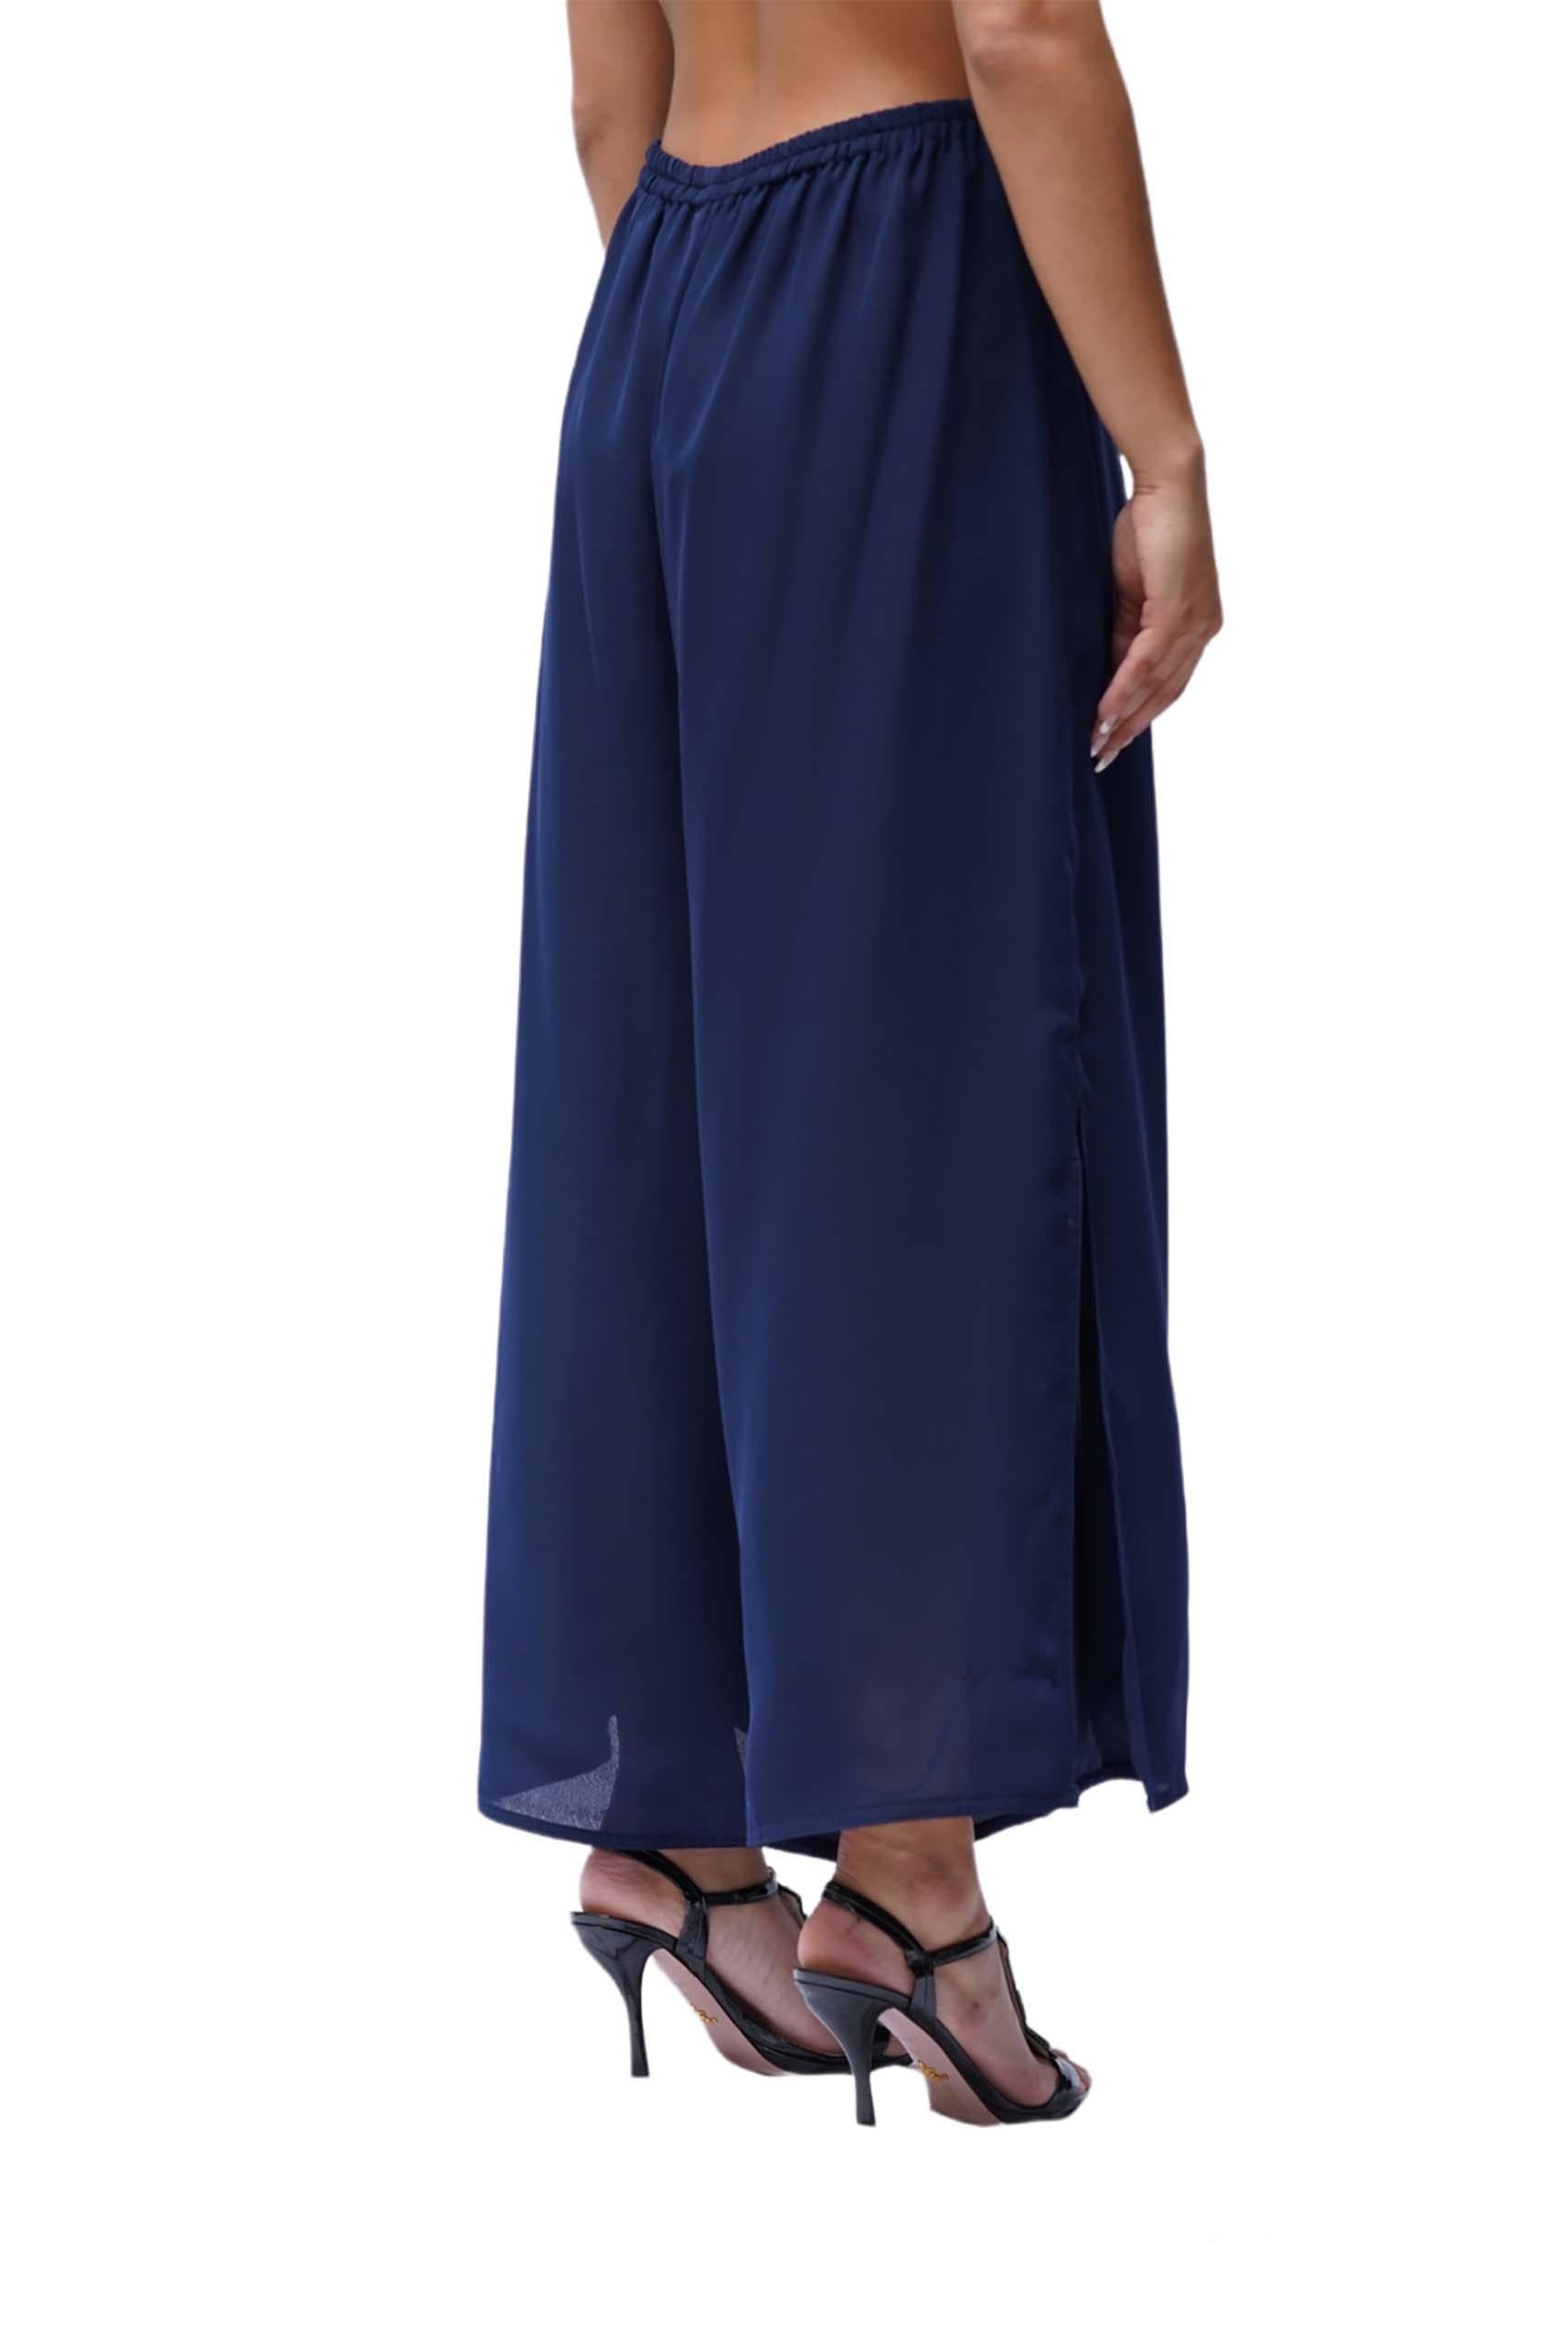 Women's 1970s Navy Blue Polyester Chiffon Pants For Sale